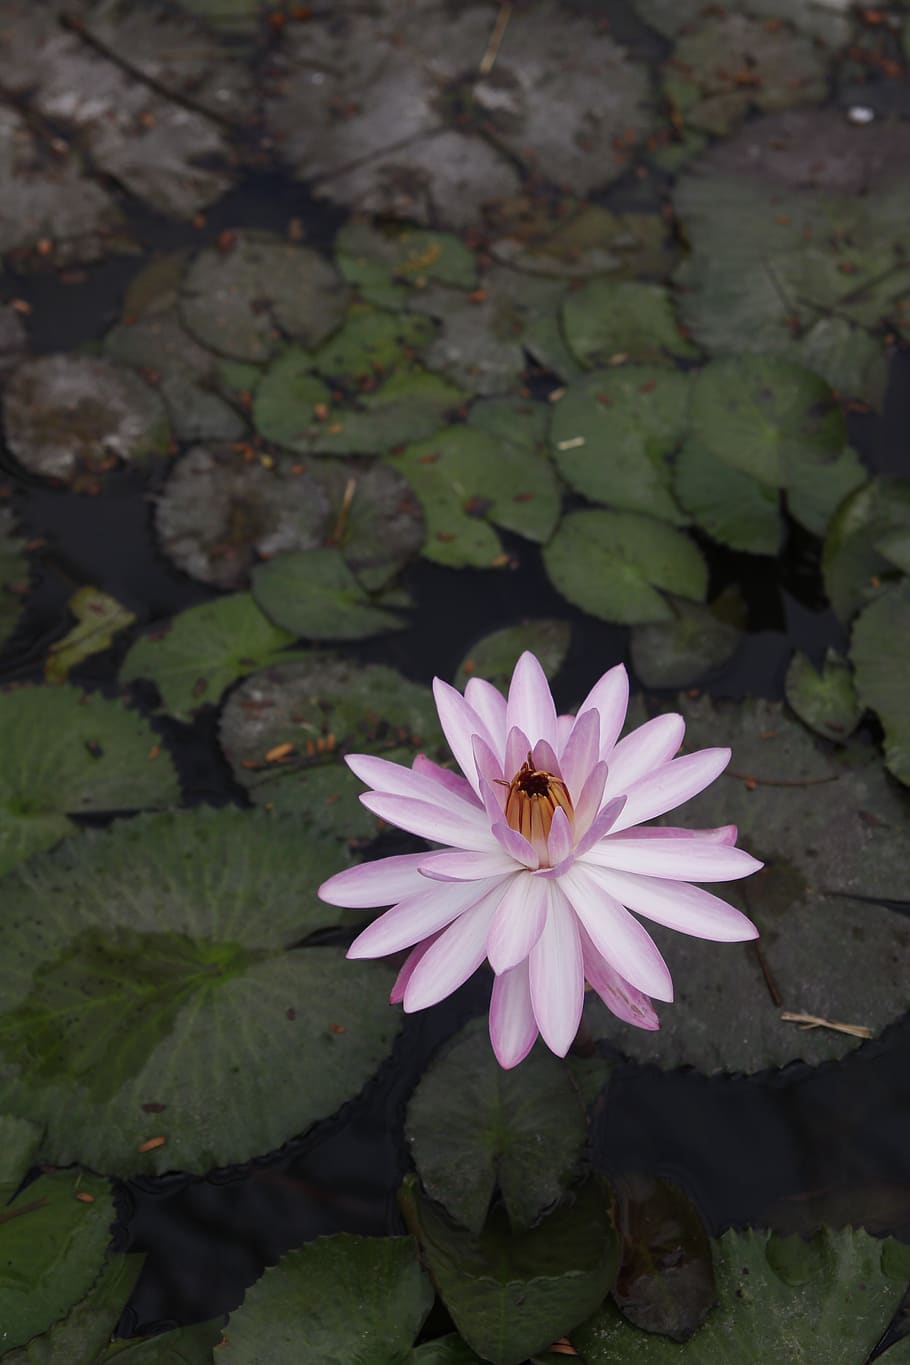 water lily, sung, pond, rajamangala, thailand, flower, flowering plant, petal, plant, fragility